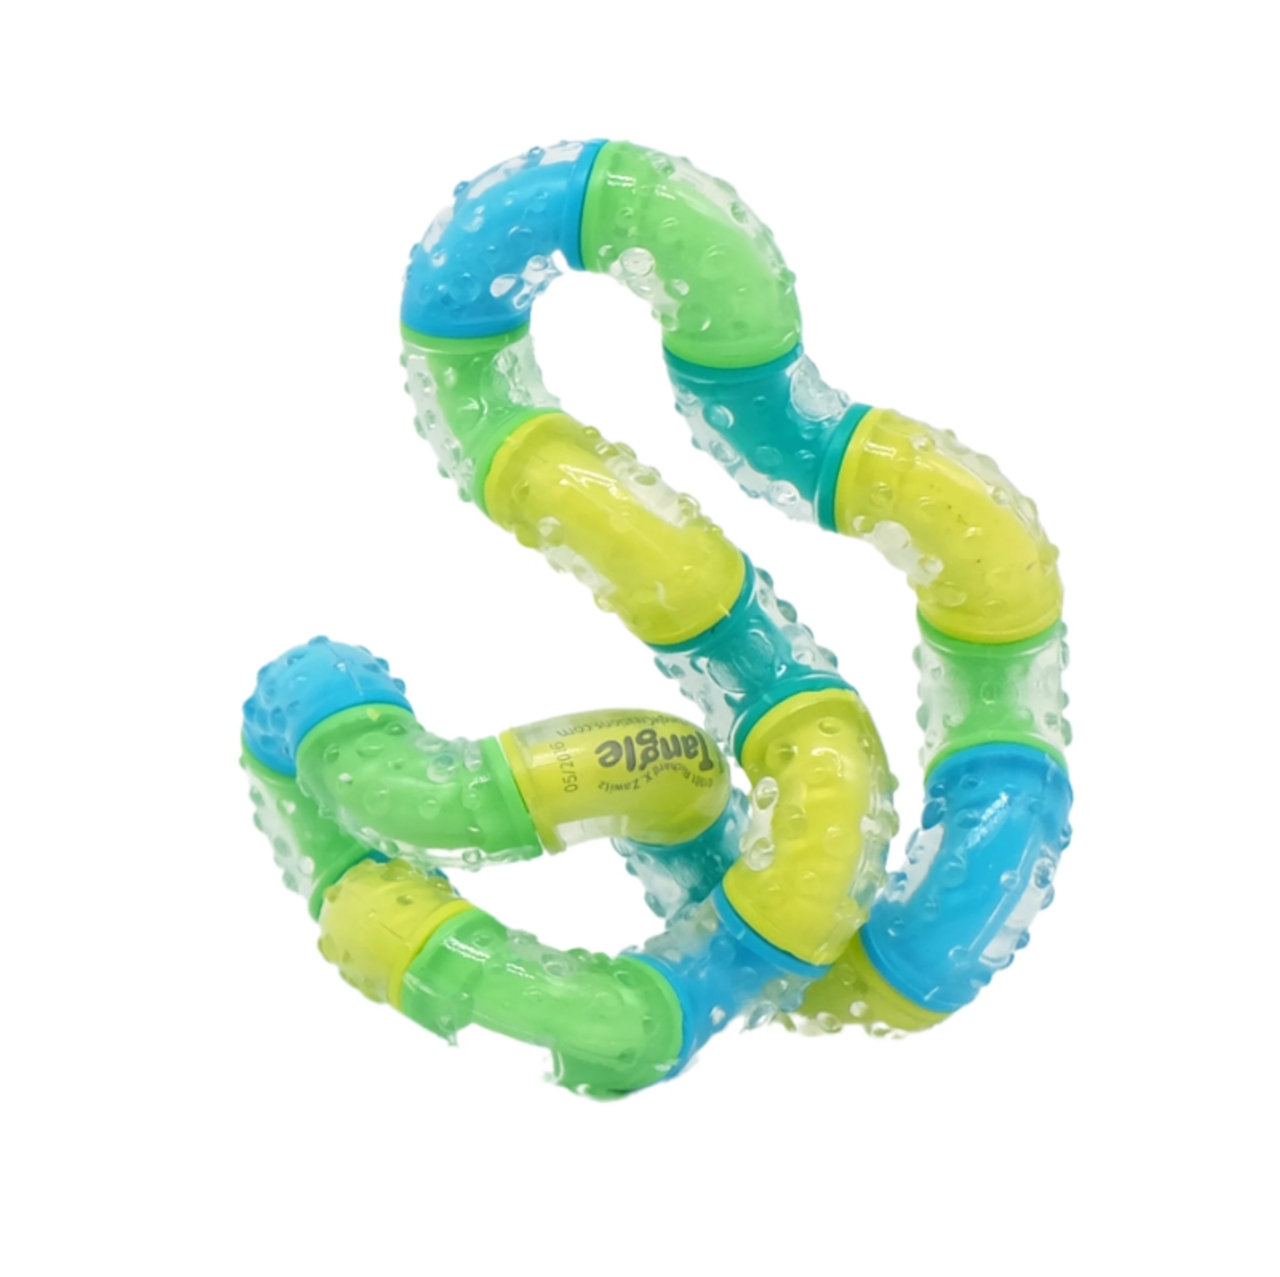 scherp Reciteren verhouding Tangle Therapy a Multi-Sensory Fidget for Students with Autism